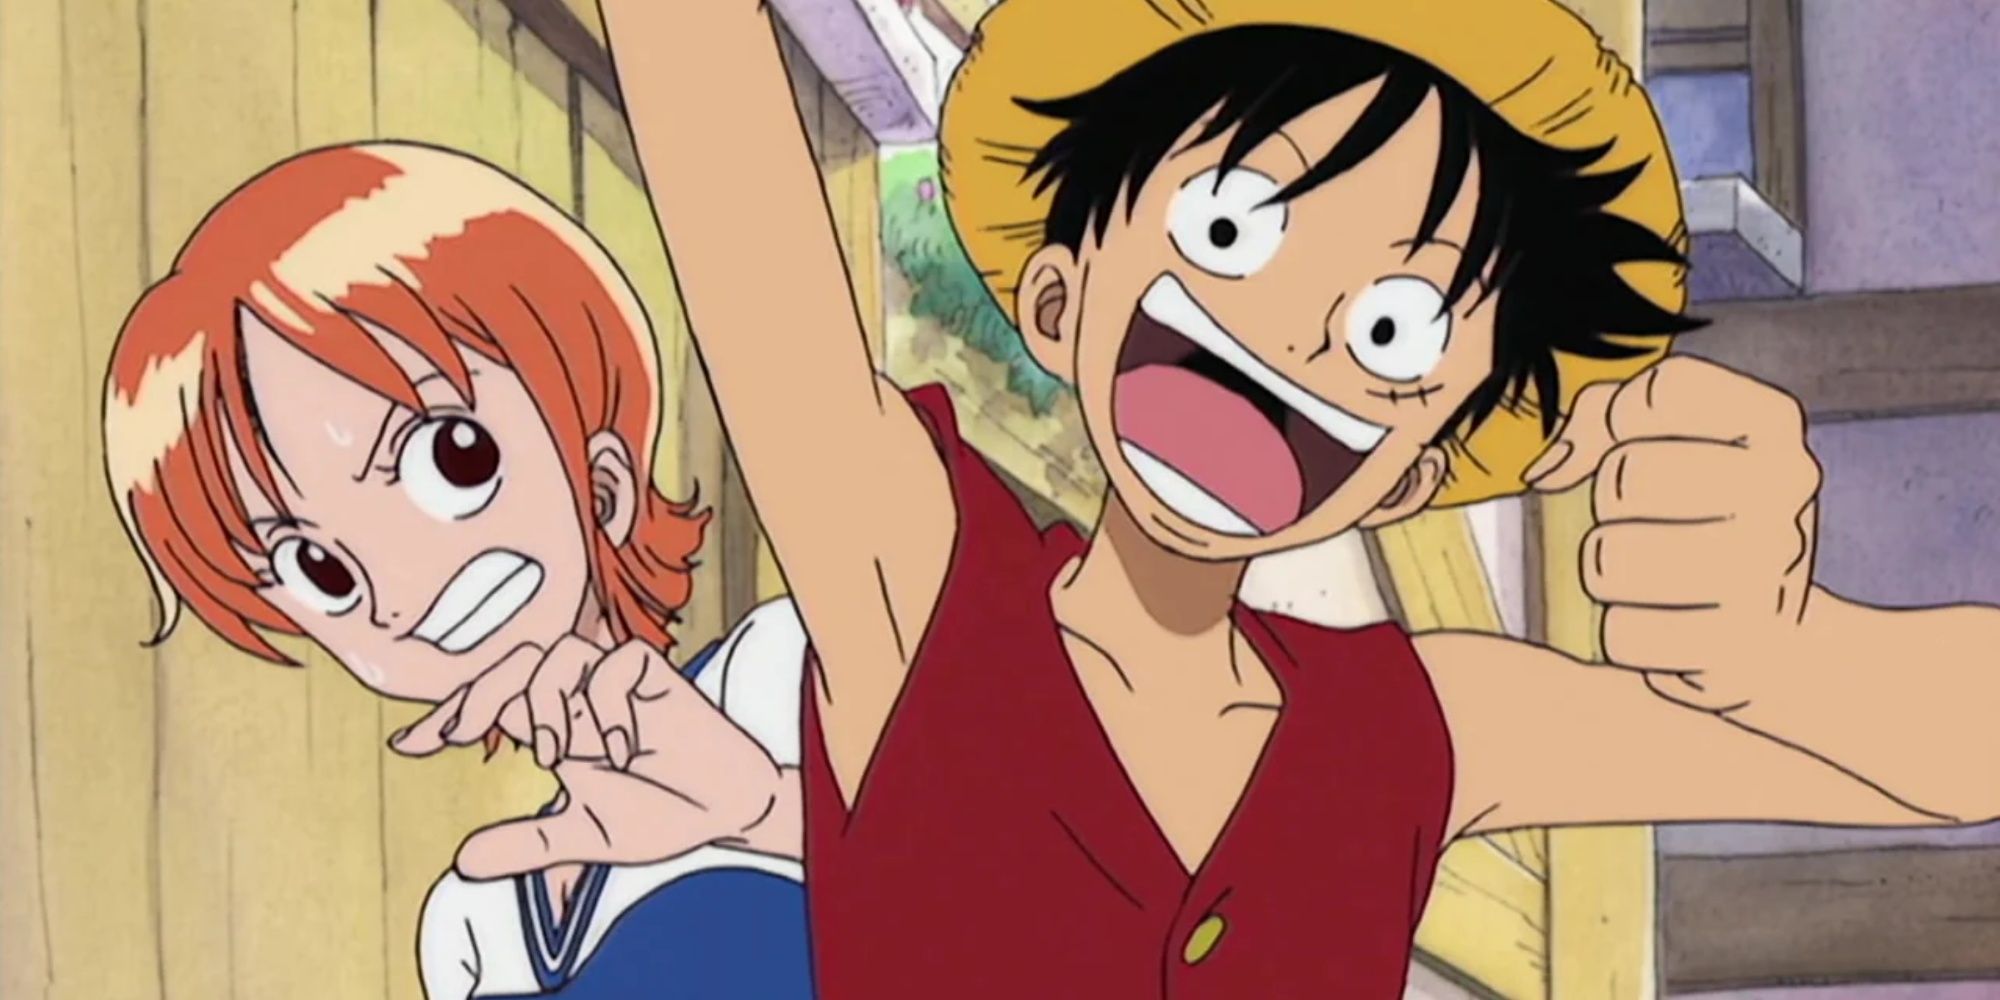 nami and luffy from one piece